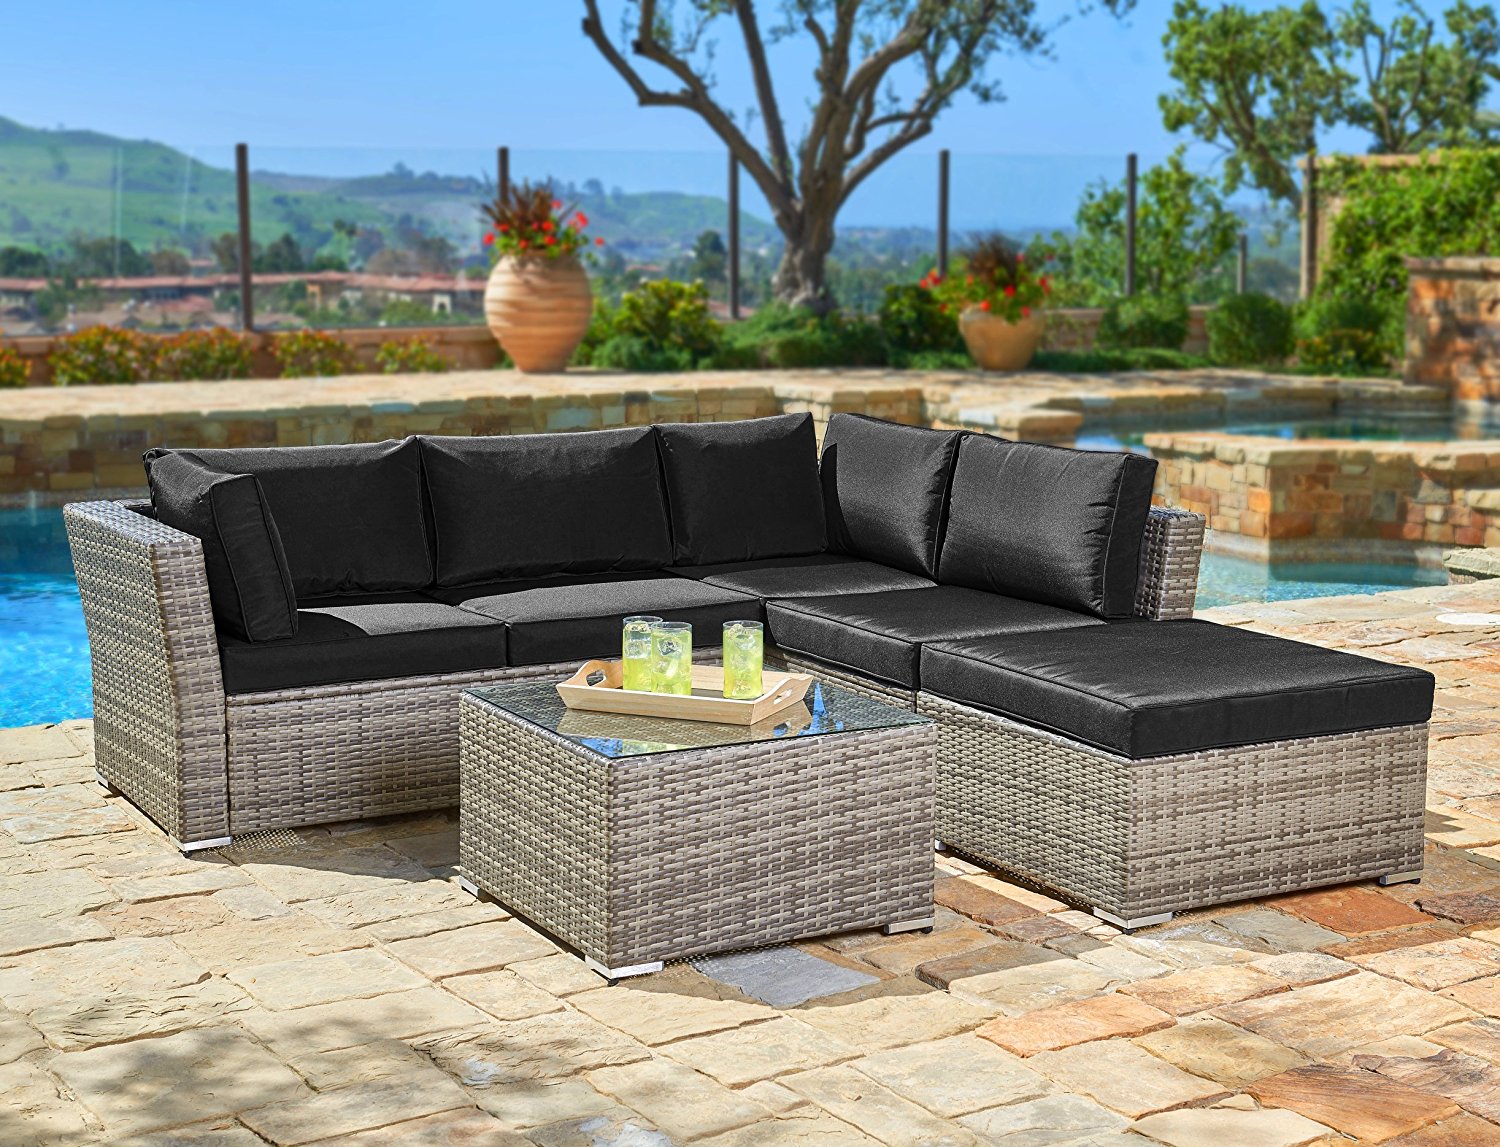 Review of Suncrown Outdoor Furniture Sectional Sofa (4-Piece Set) All-Weather